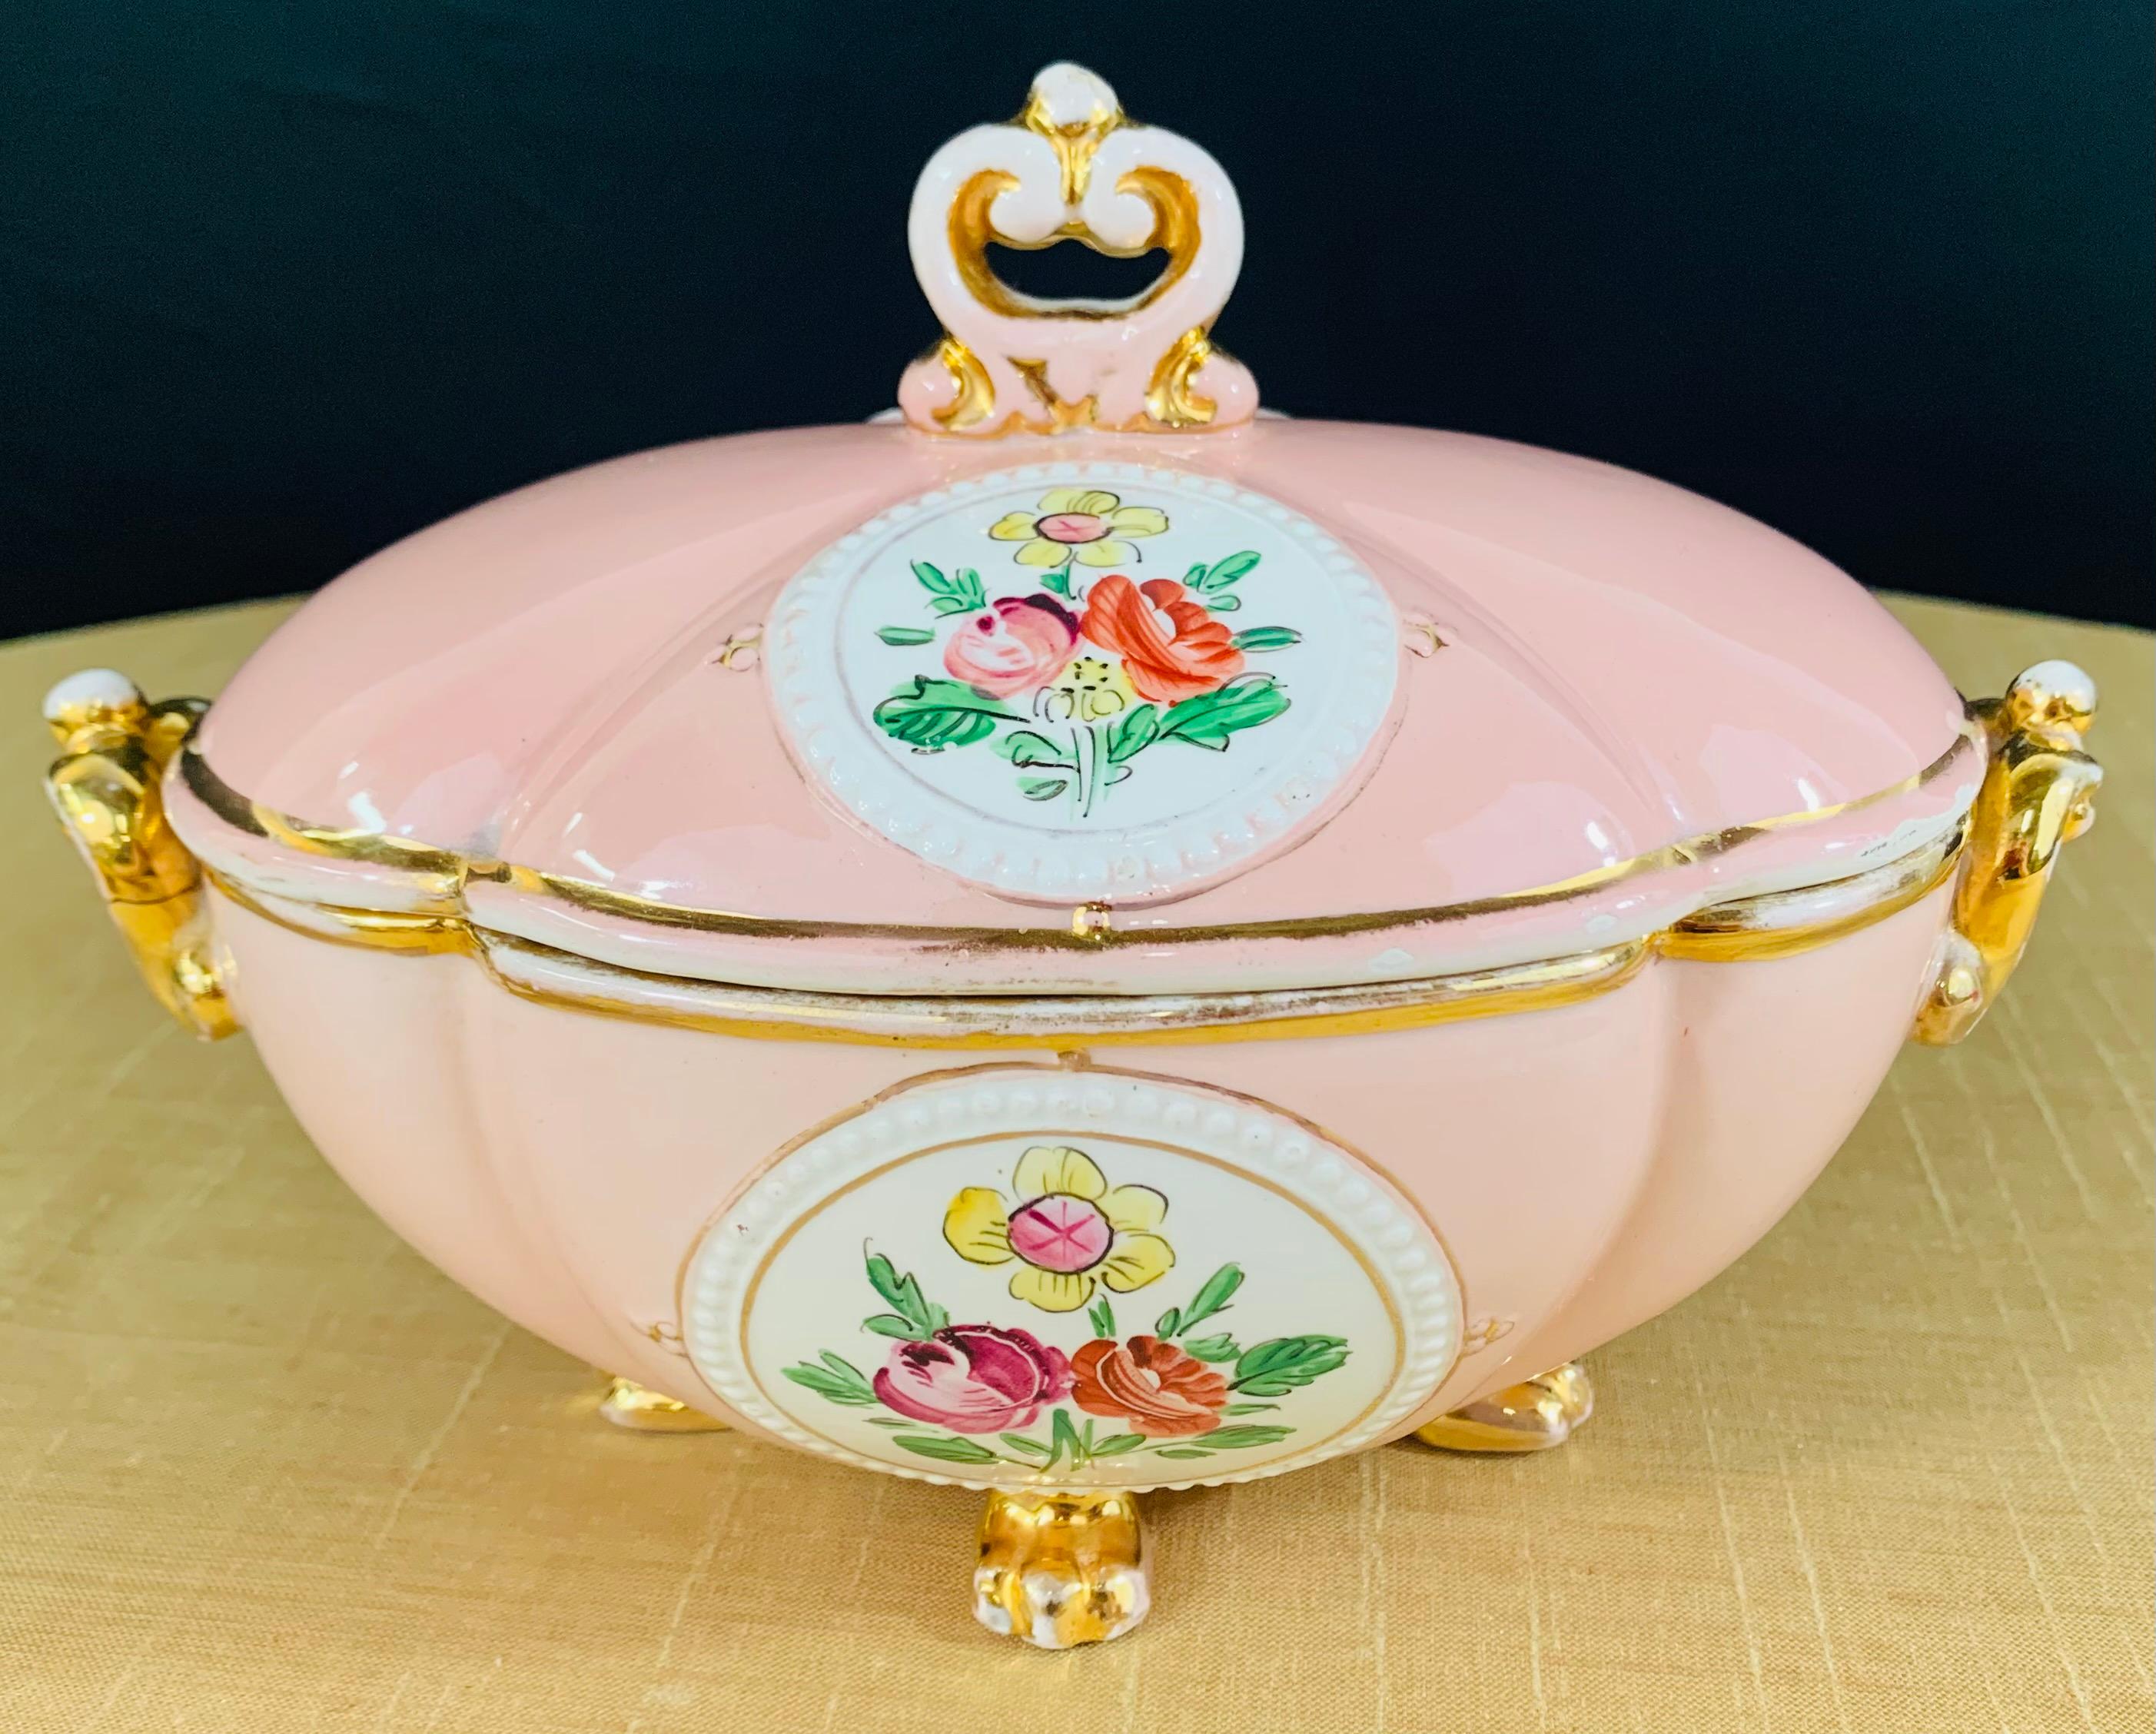 An exquisite and decorative Italian porcelain jewelry box. Hand painted in pink, gold and white with flower motifs, the jewlery box is signed in the bottom 